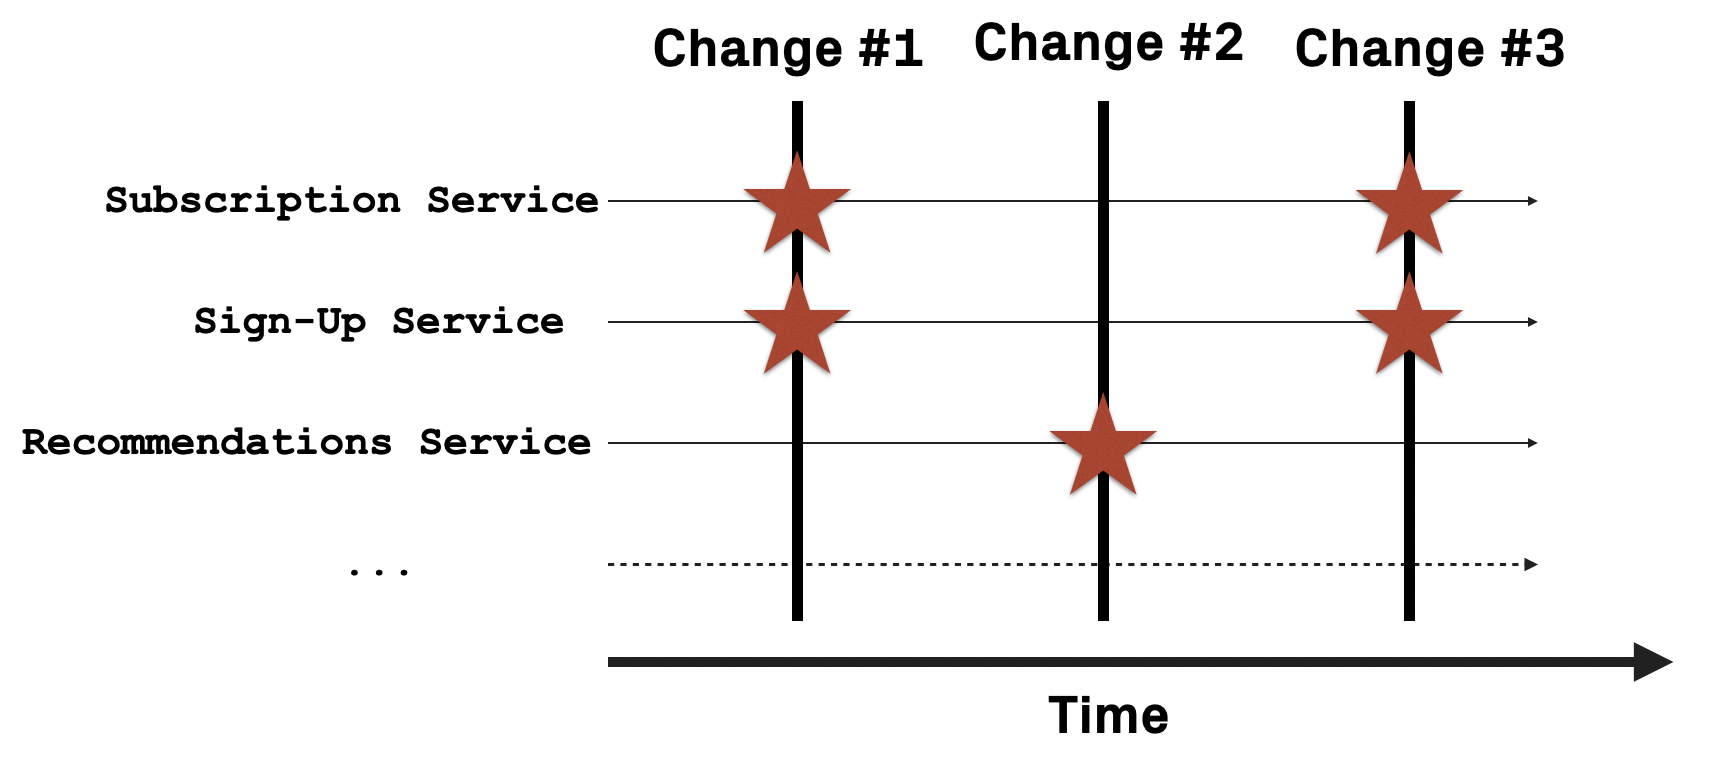 Change Coupling means that two (or more) modules repeatedly change together over time.